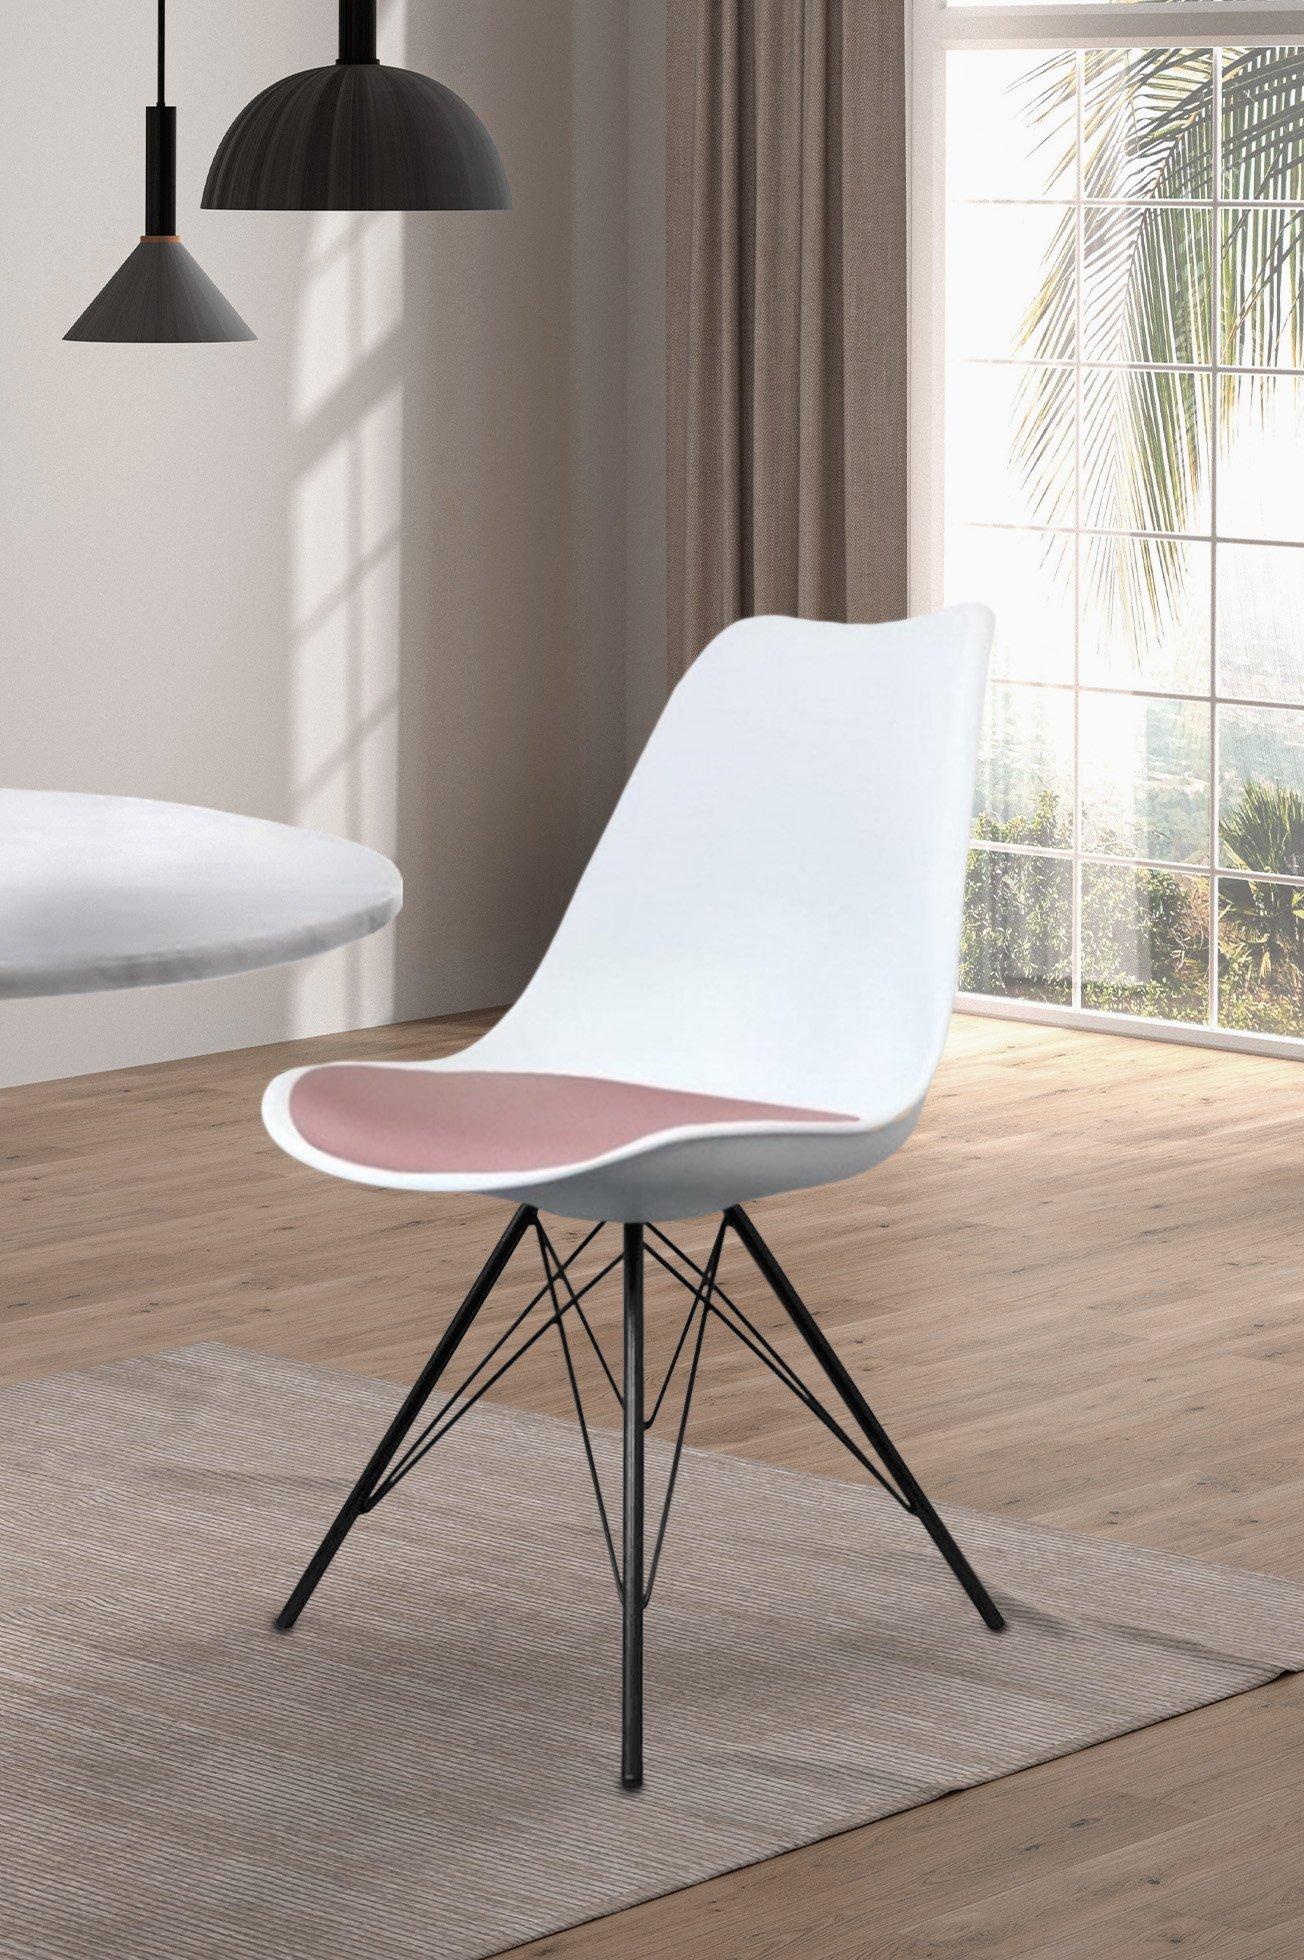 Soho Plastic Dining Chair with Black Metal Legs